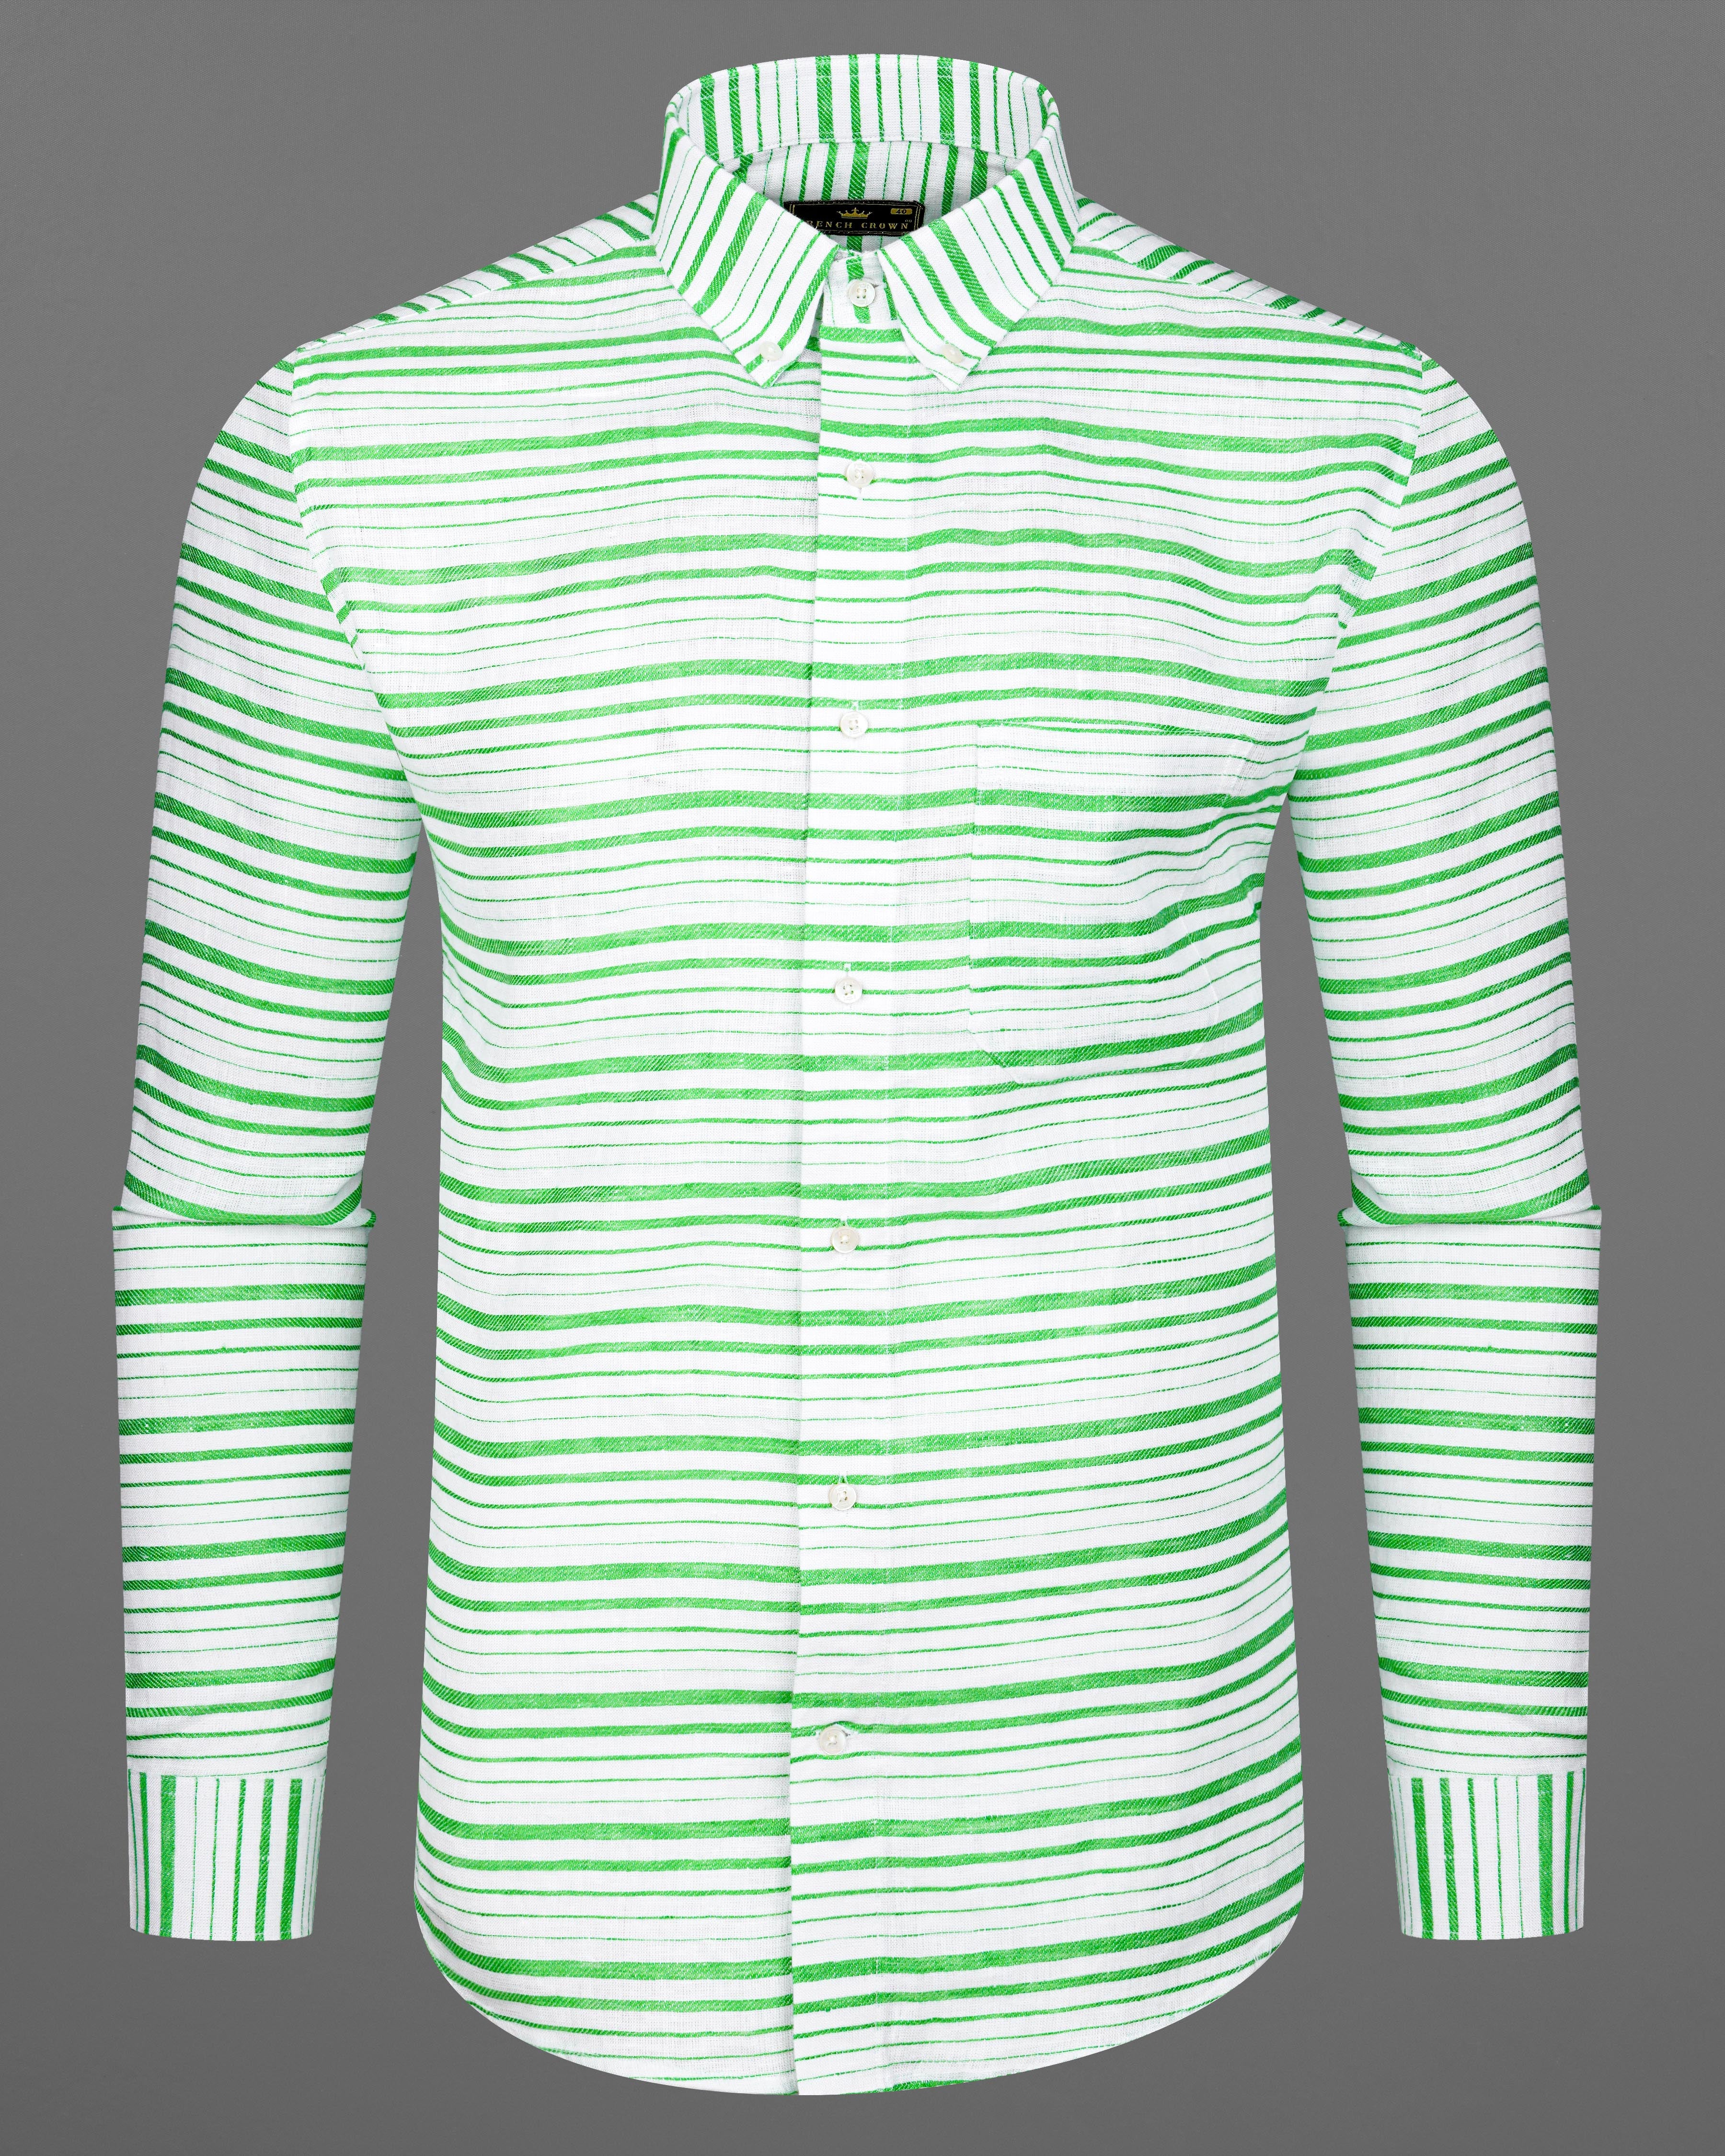 Green striped shirts for men